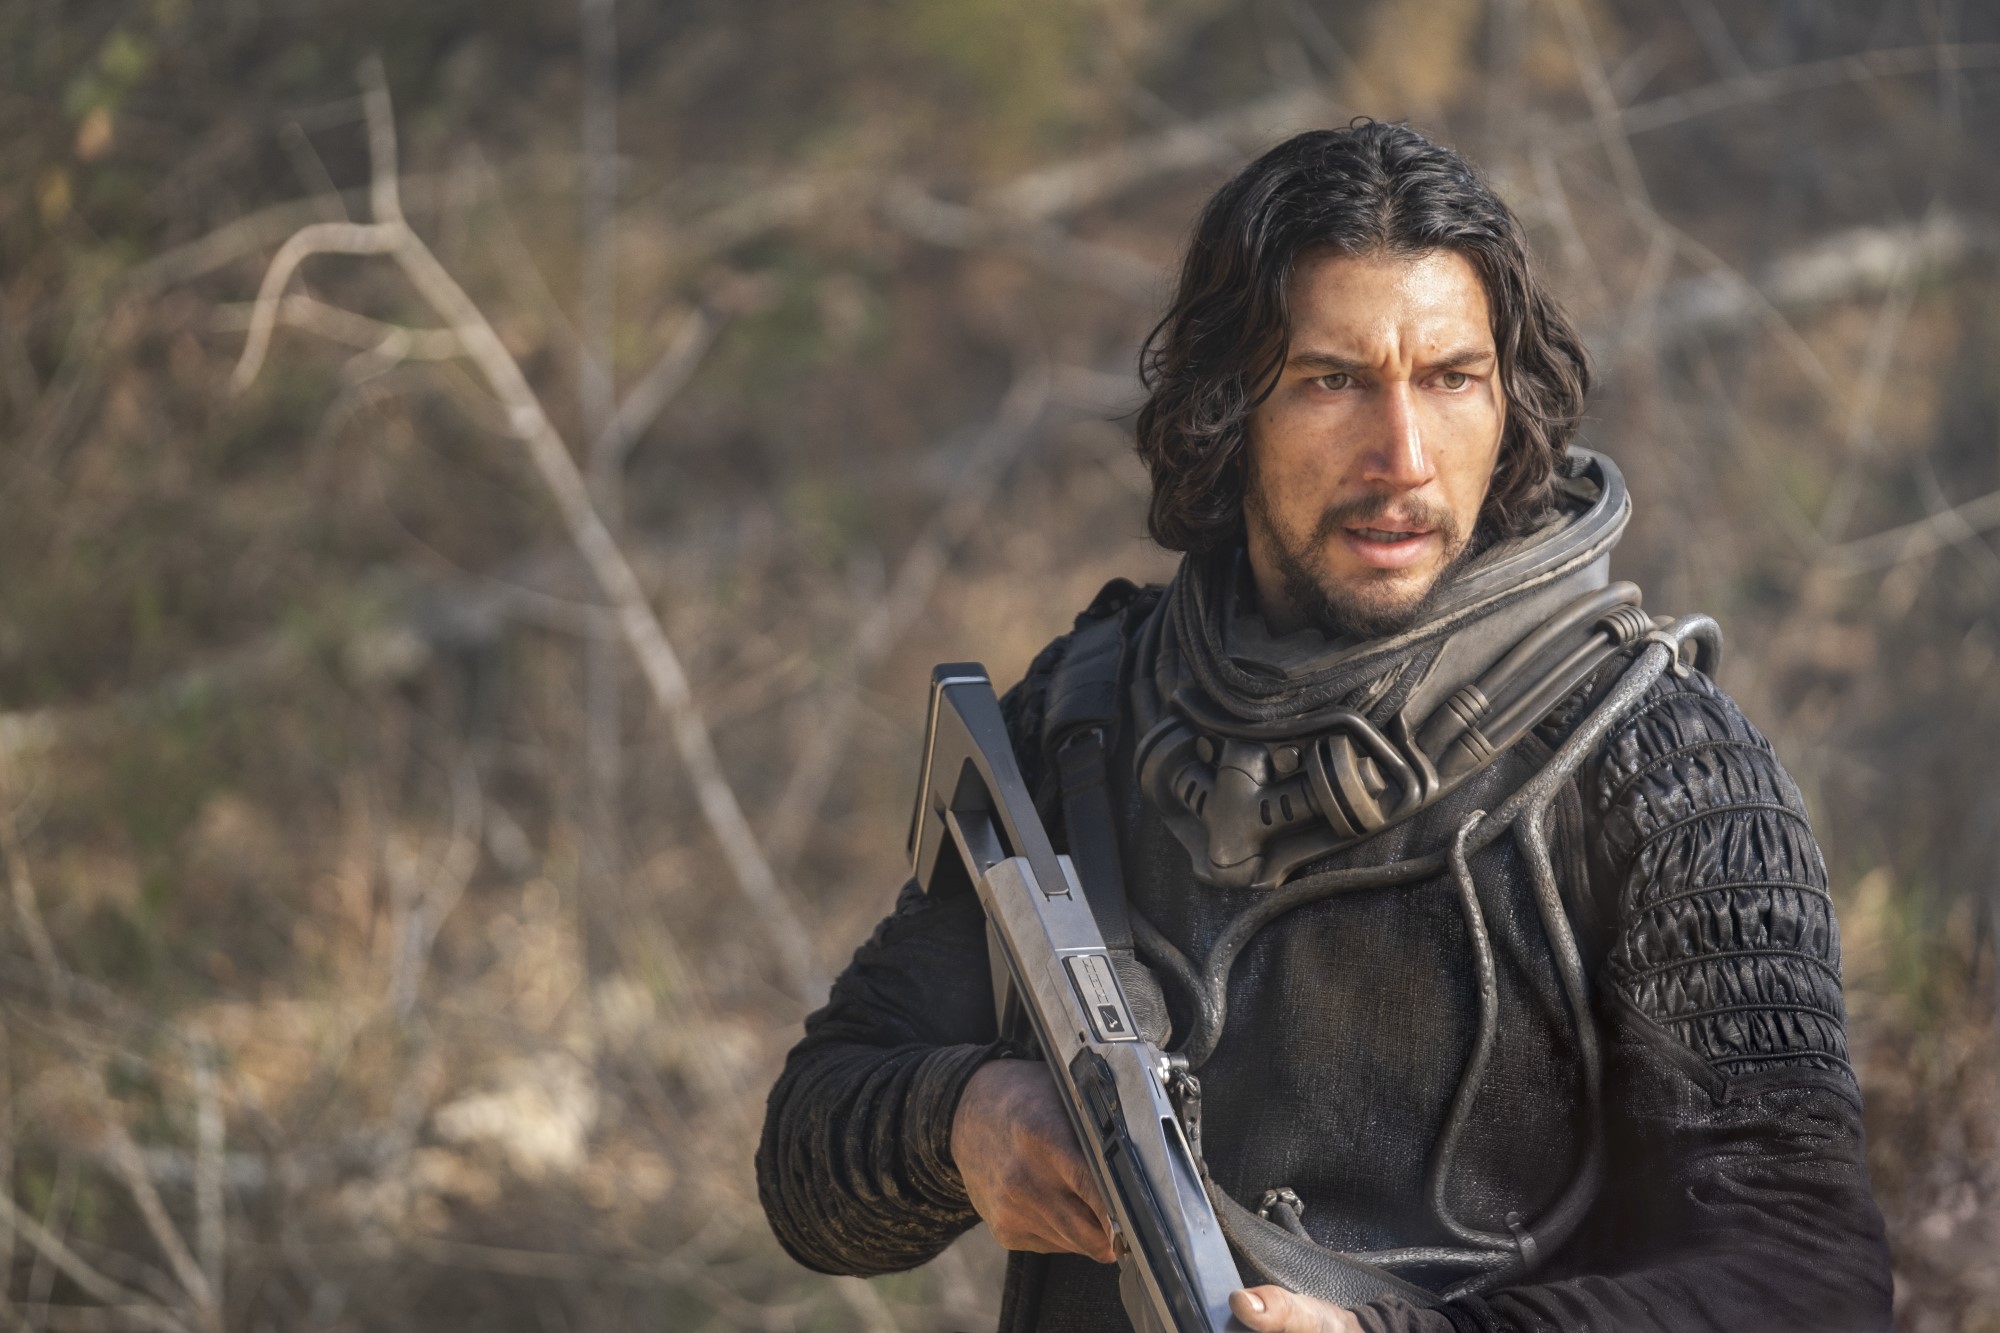 It's Adam Driver vs. Dinosaurs In Sony Feature '65' [Trailer] That